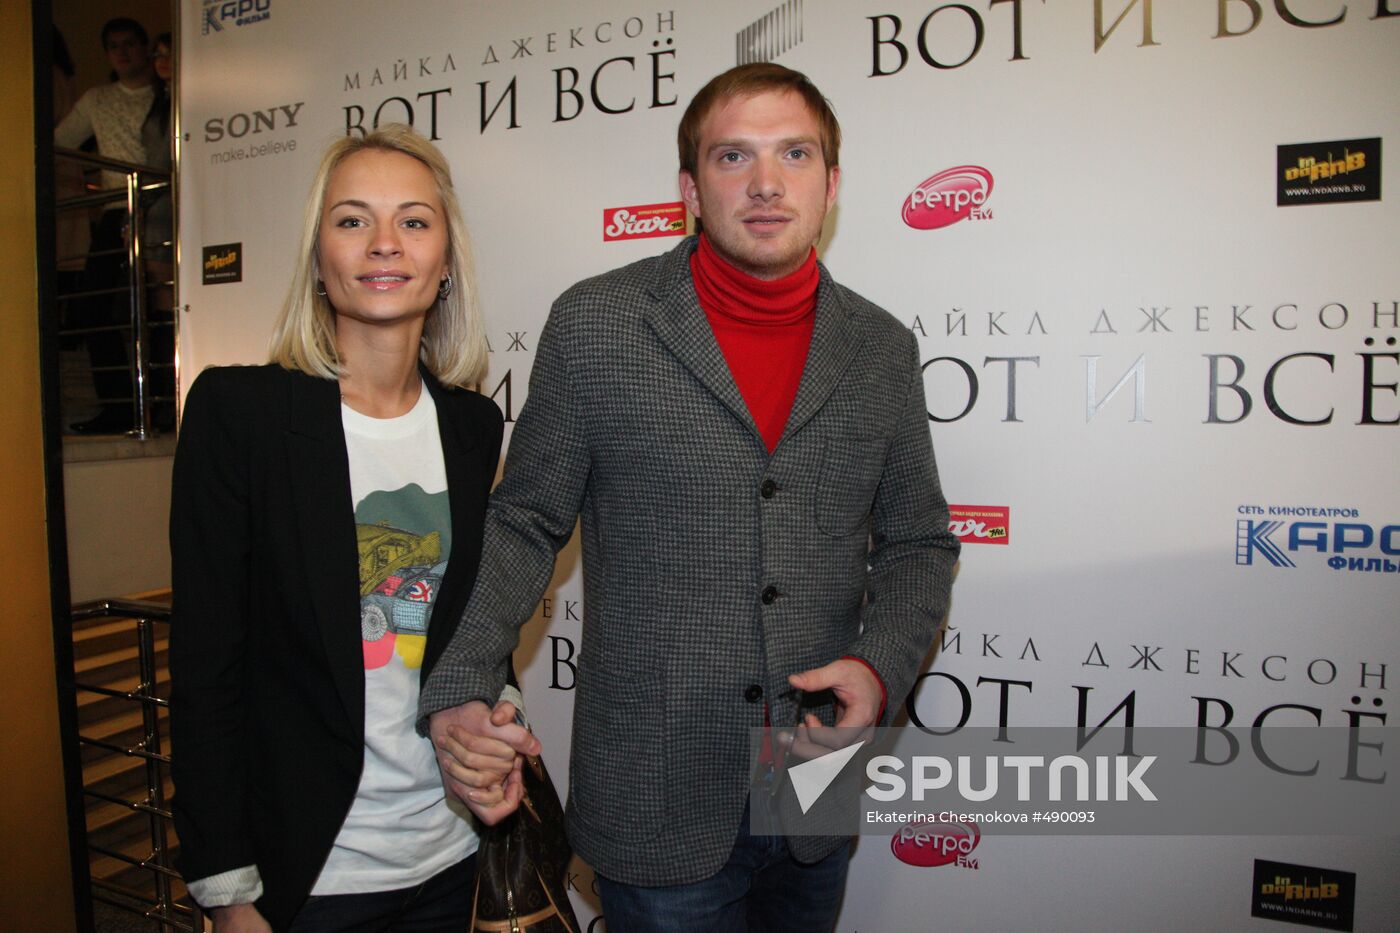 Andrei Burkovsky attends This Is It premiere